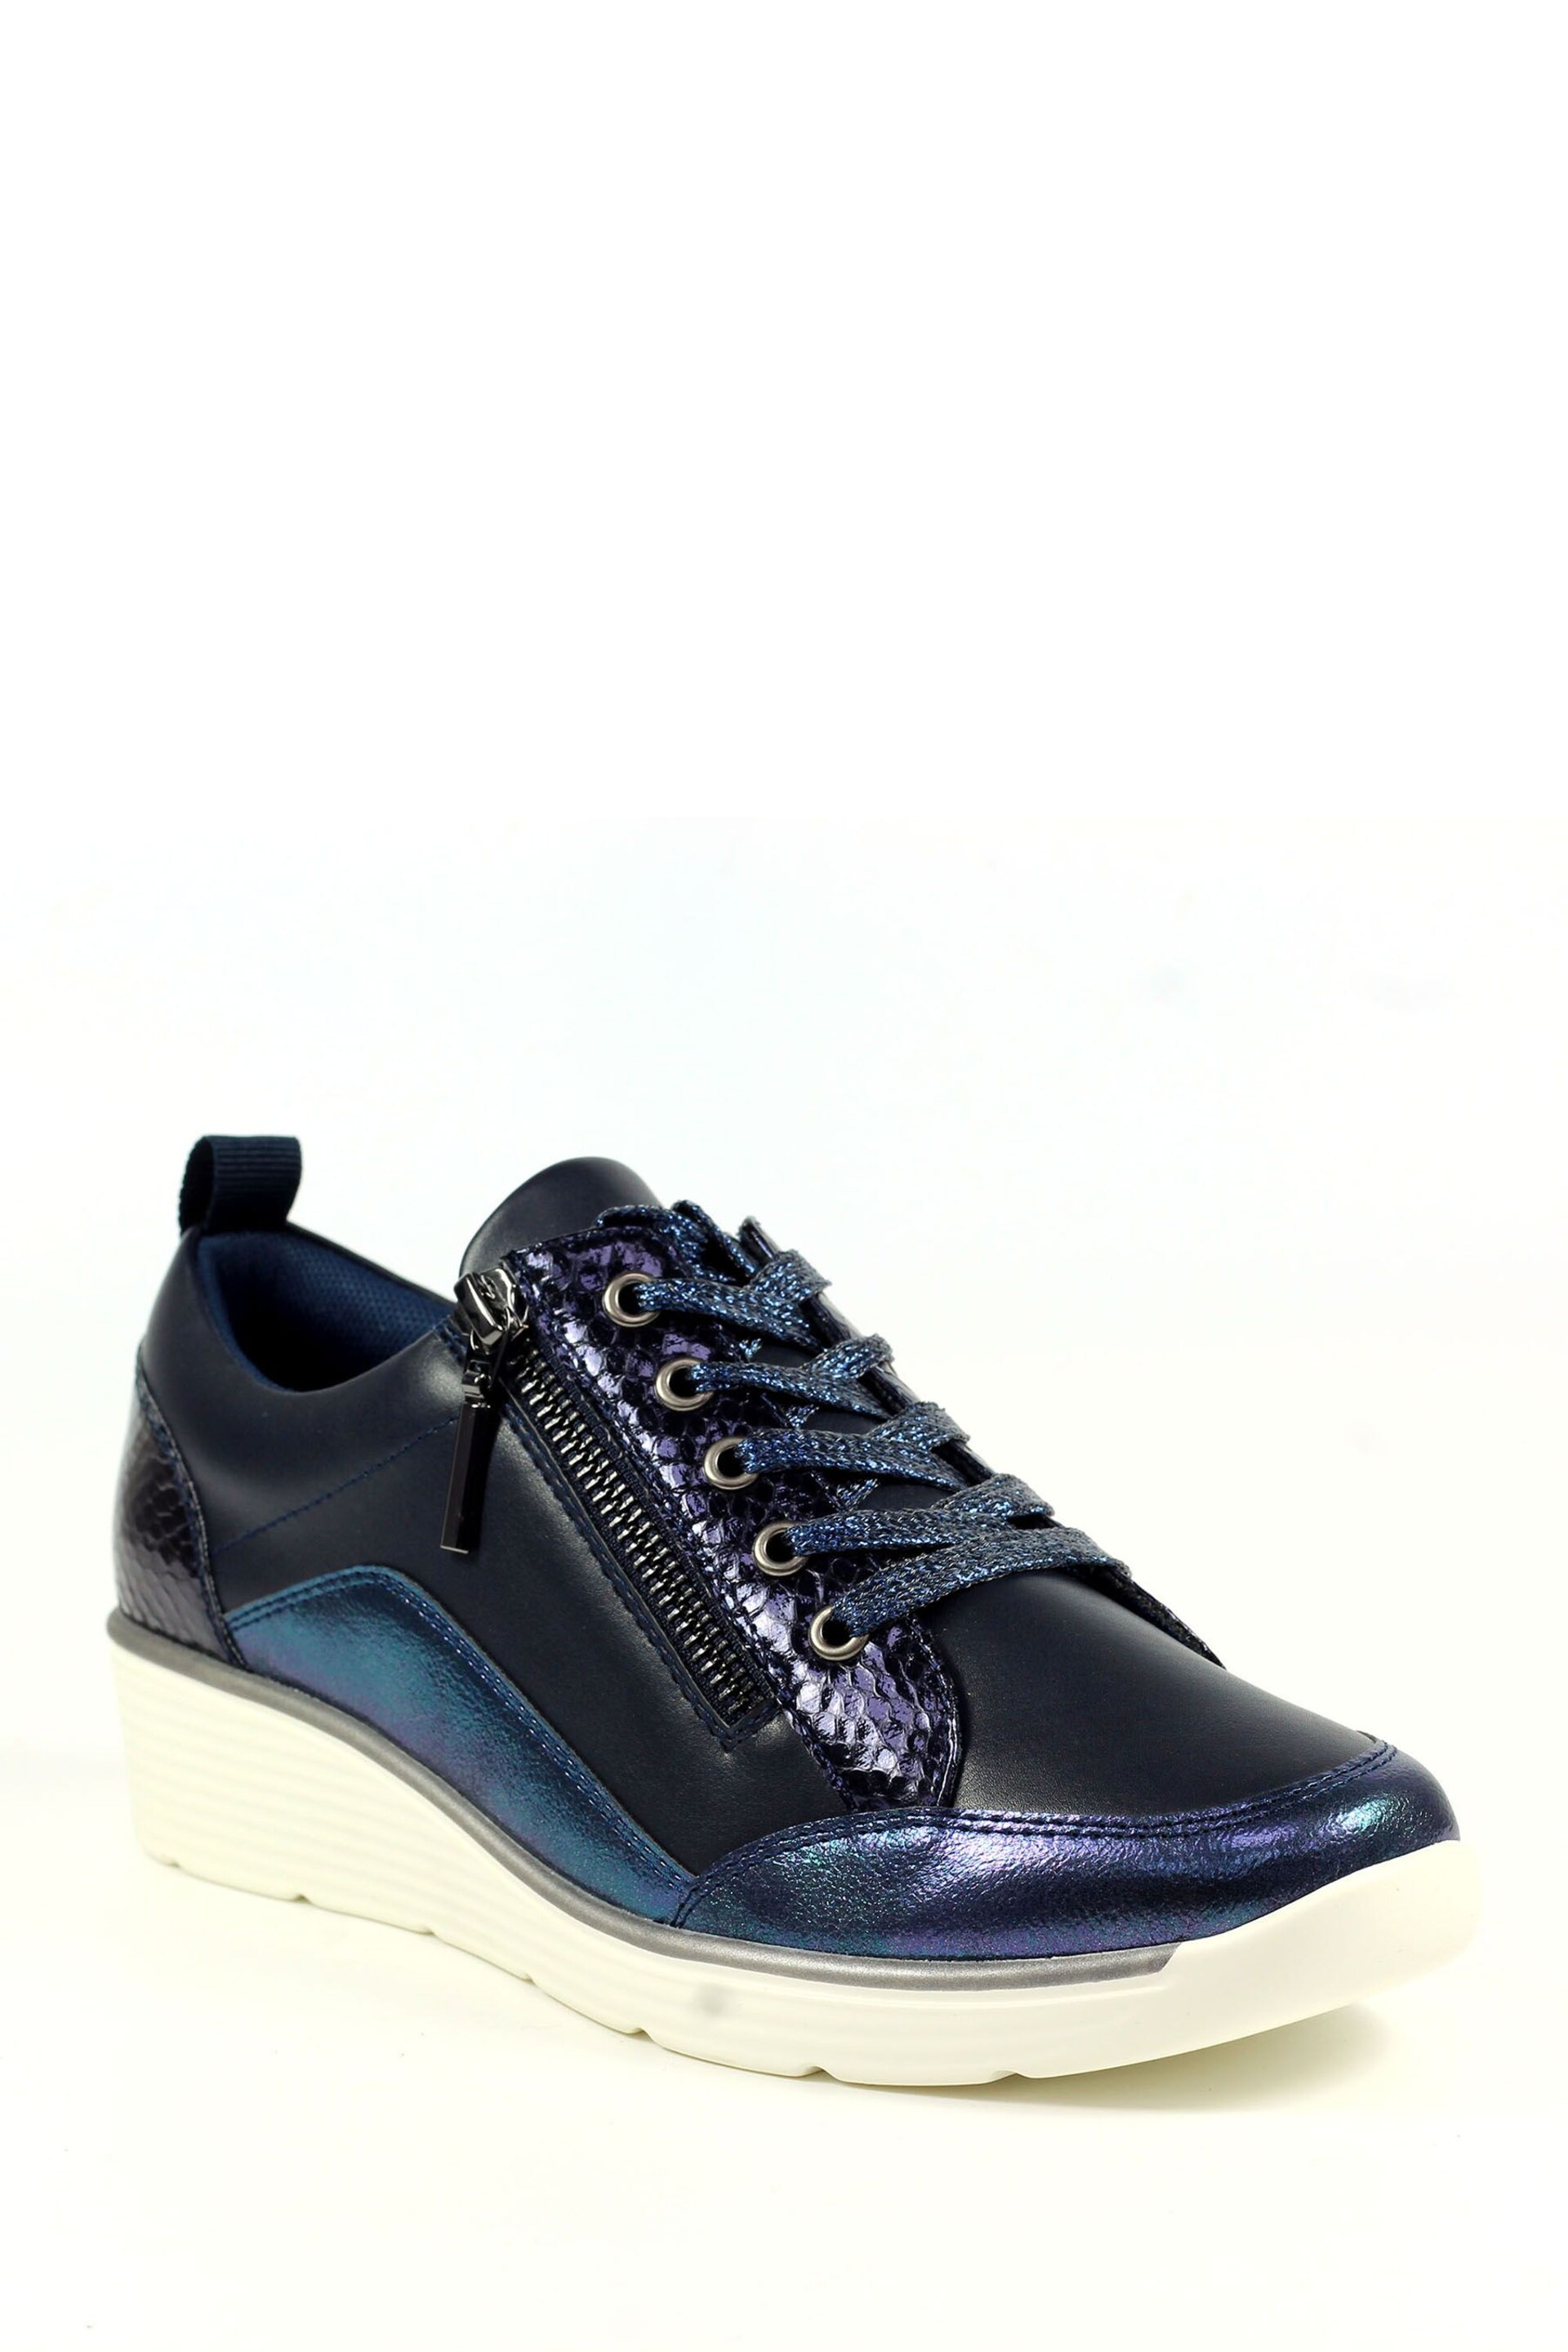 Lunar Navy Blue Kiley Trainers - Image 4 of 8